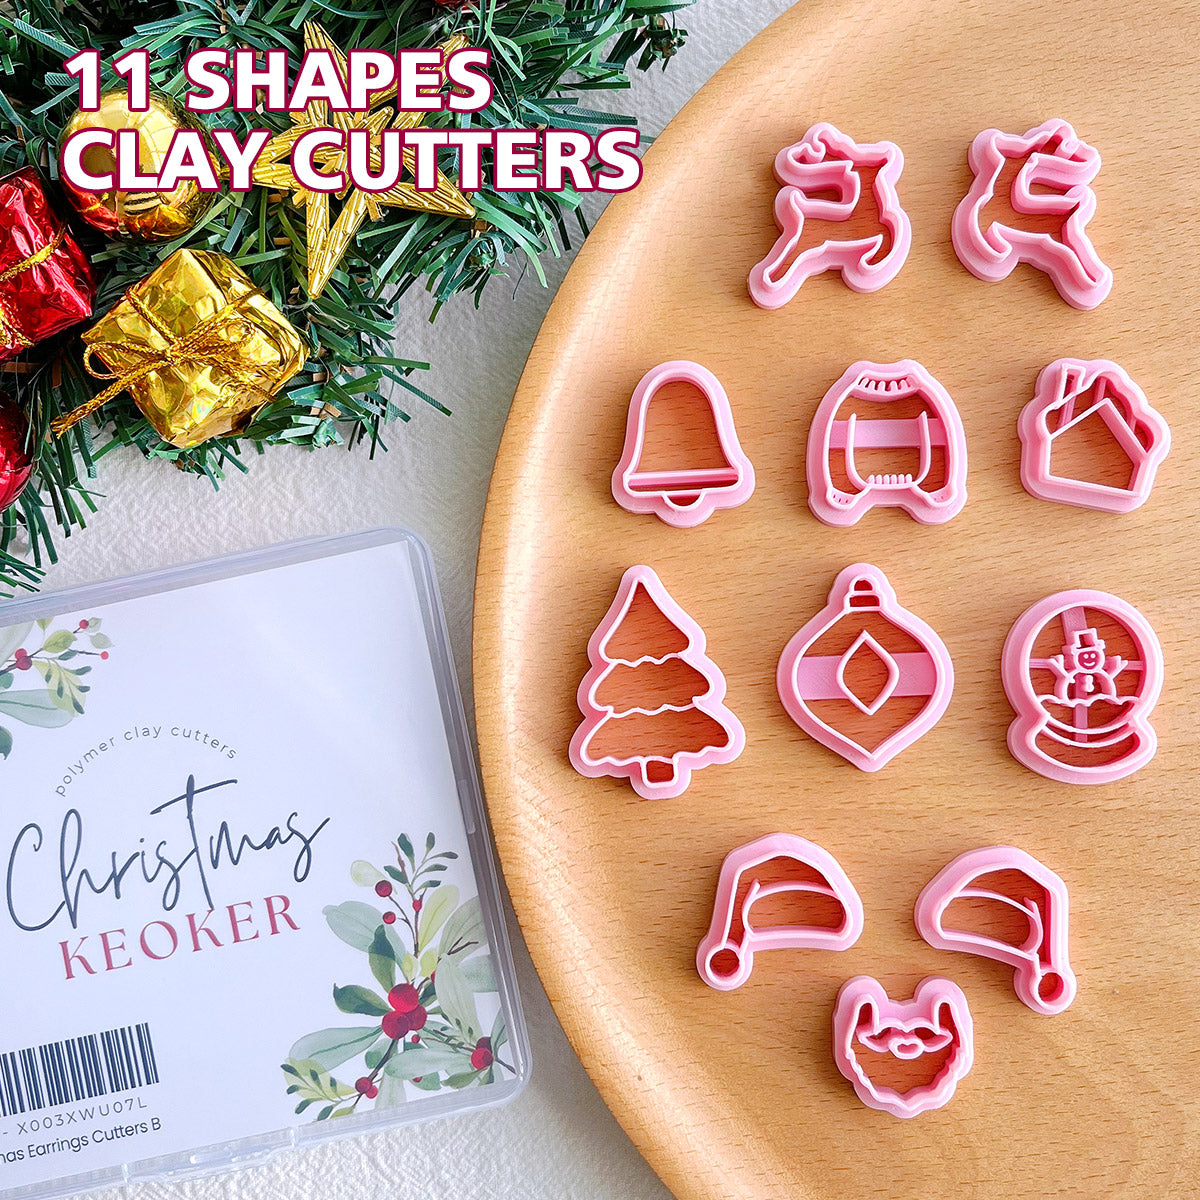 KEOKER Christmas Polymer Clay Cutters (11 Shapes)